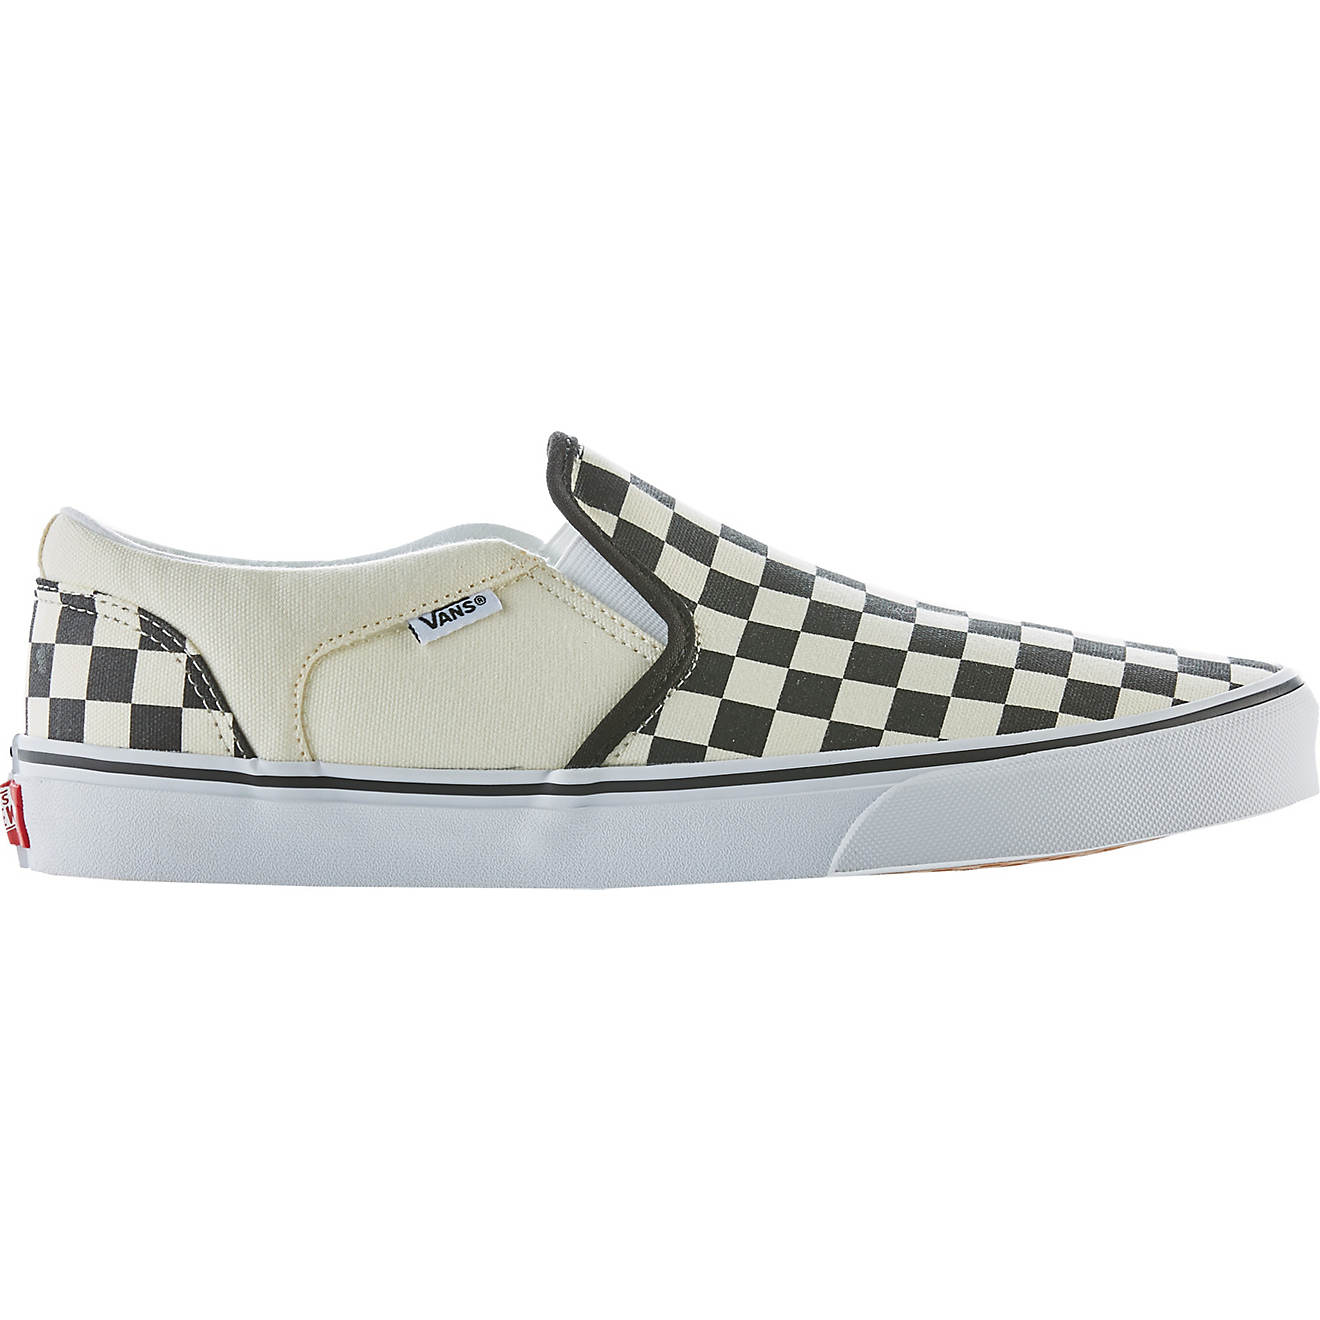 Vans Men's Asher Slip-on Shoes | Free Shipping at Academy